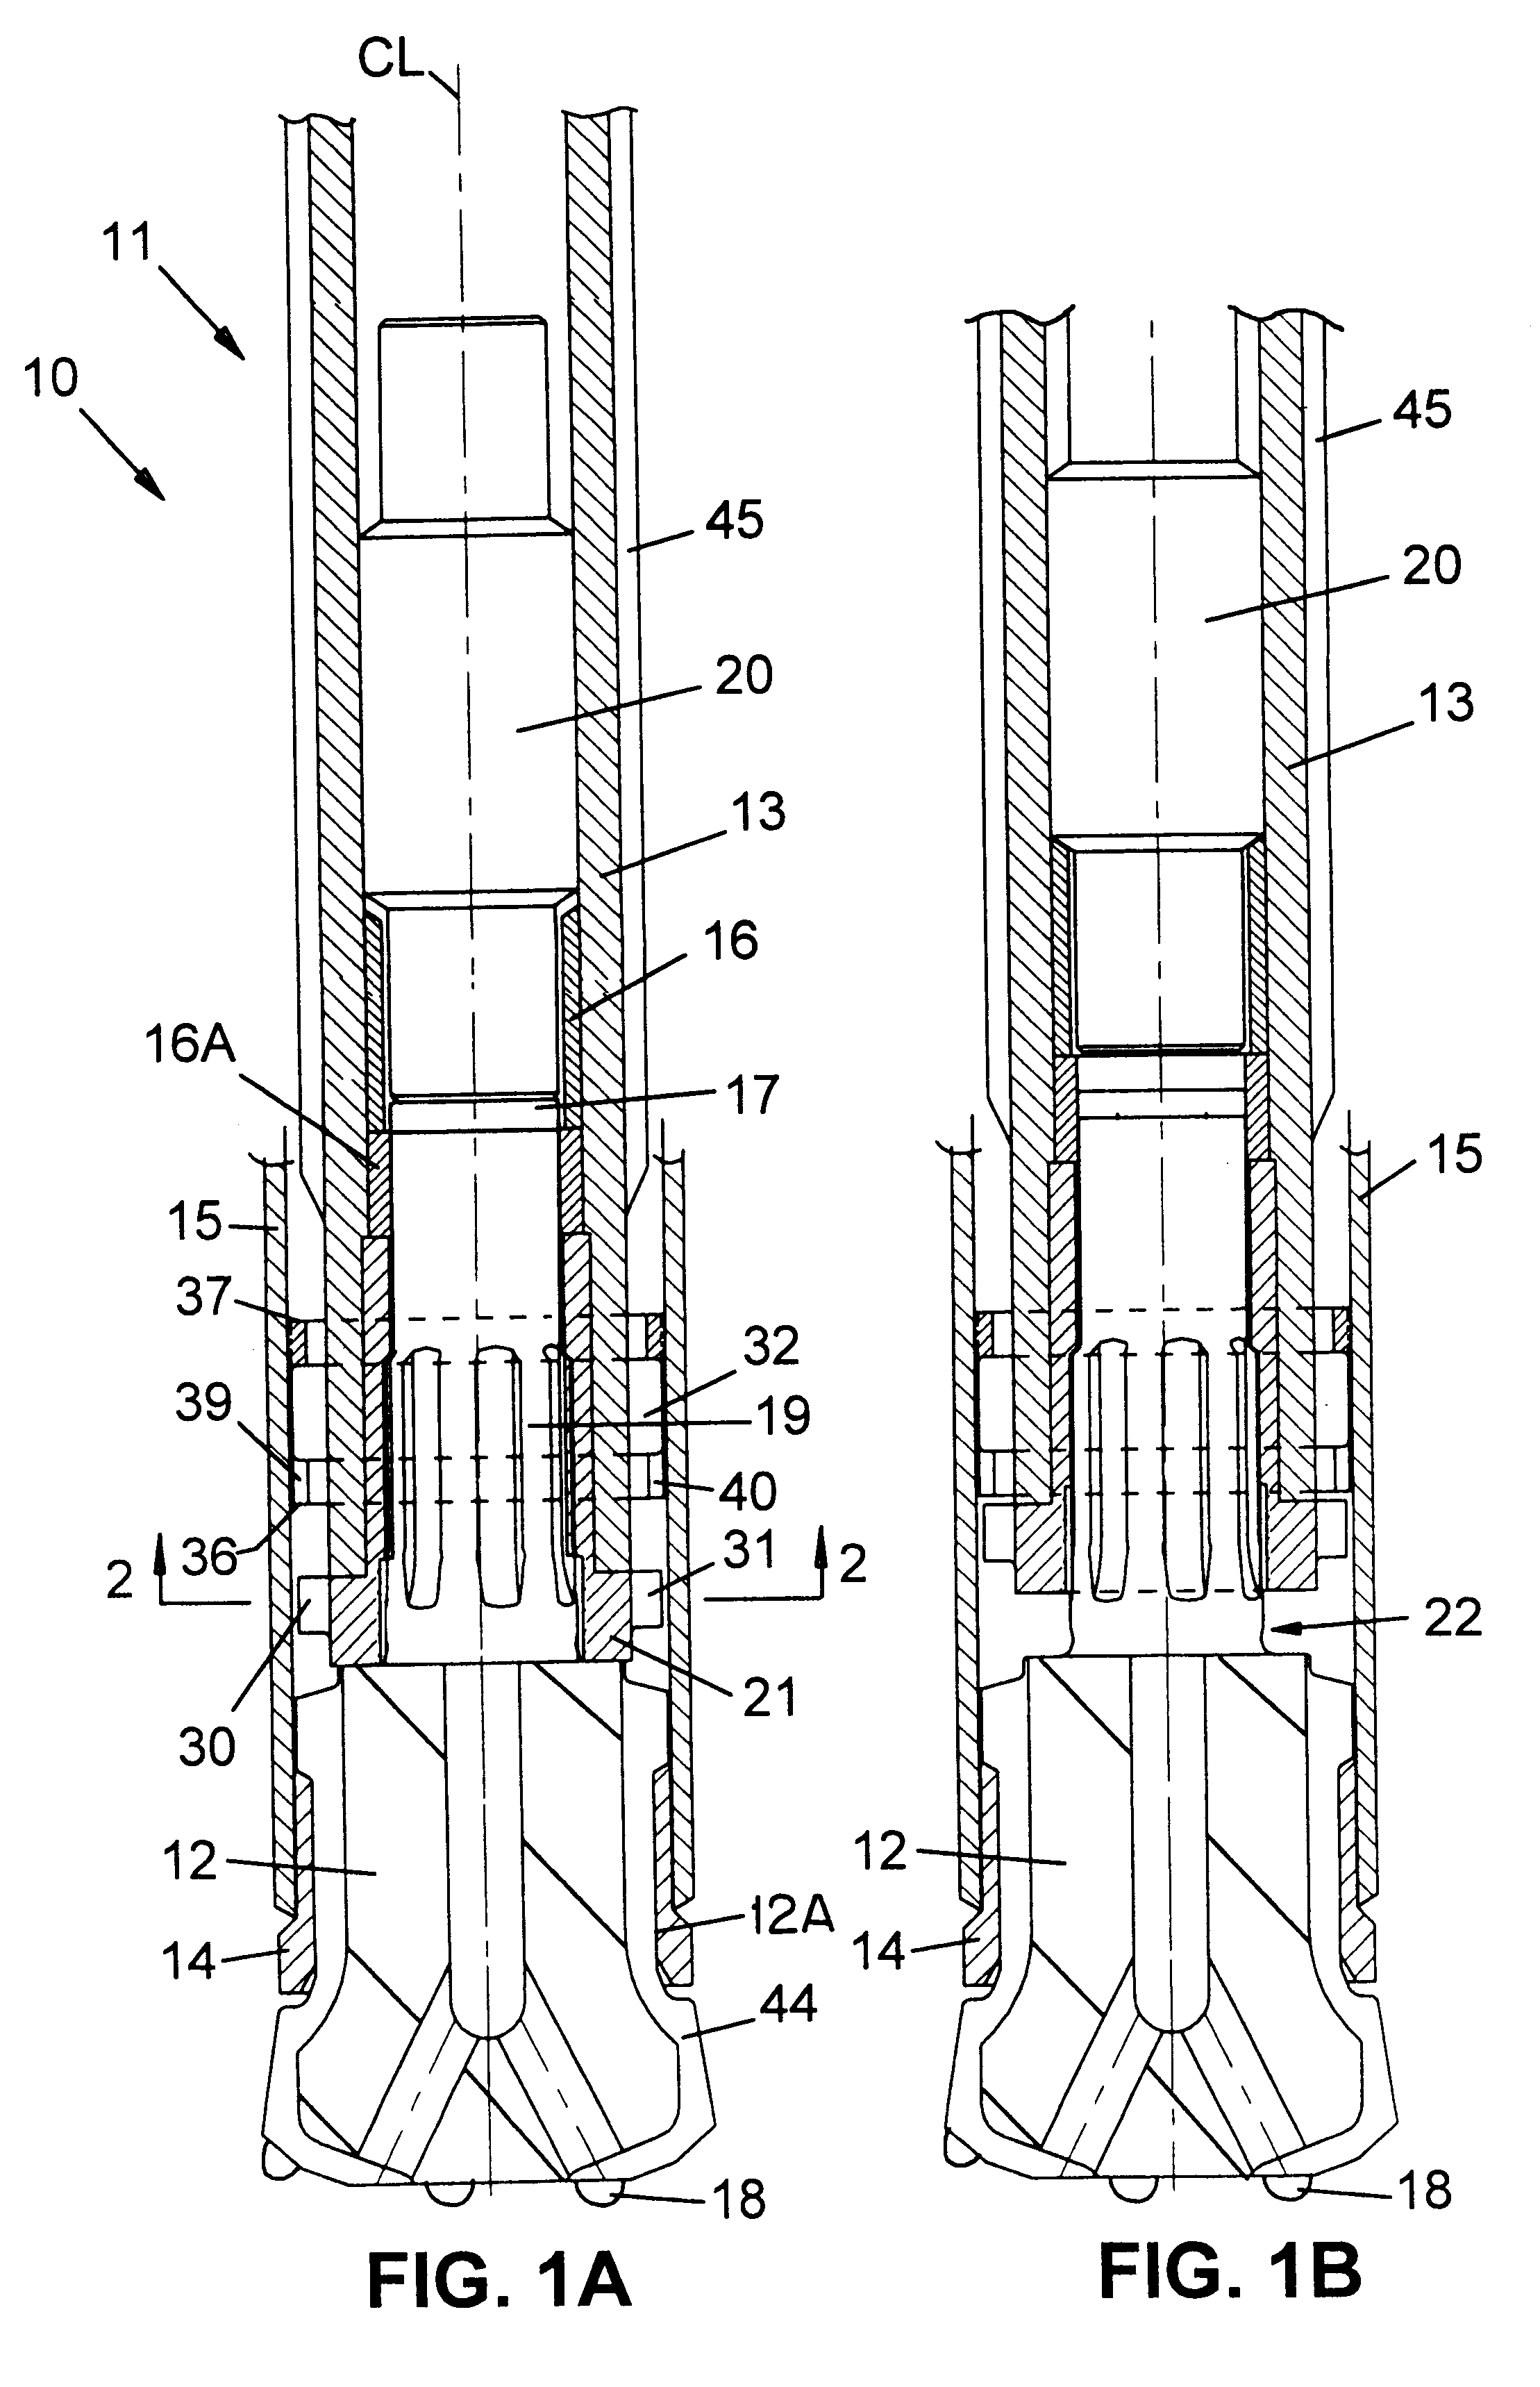 Overburden drilling apparatus having a down-the-hole hammer separatable from an outer casing/drill bit unit